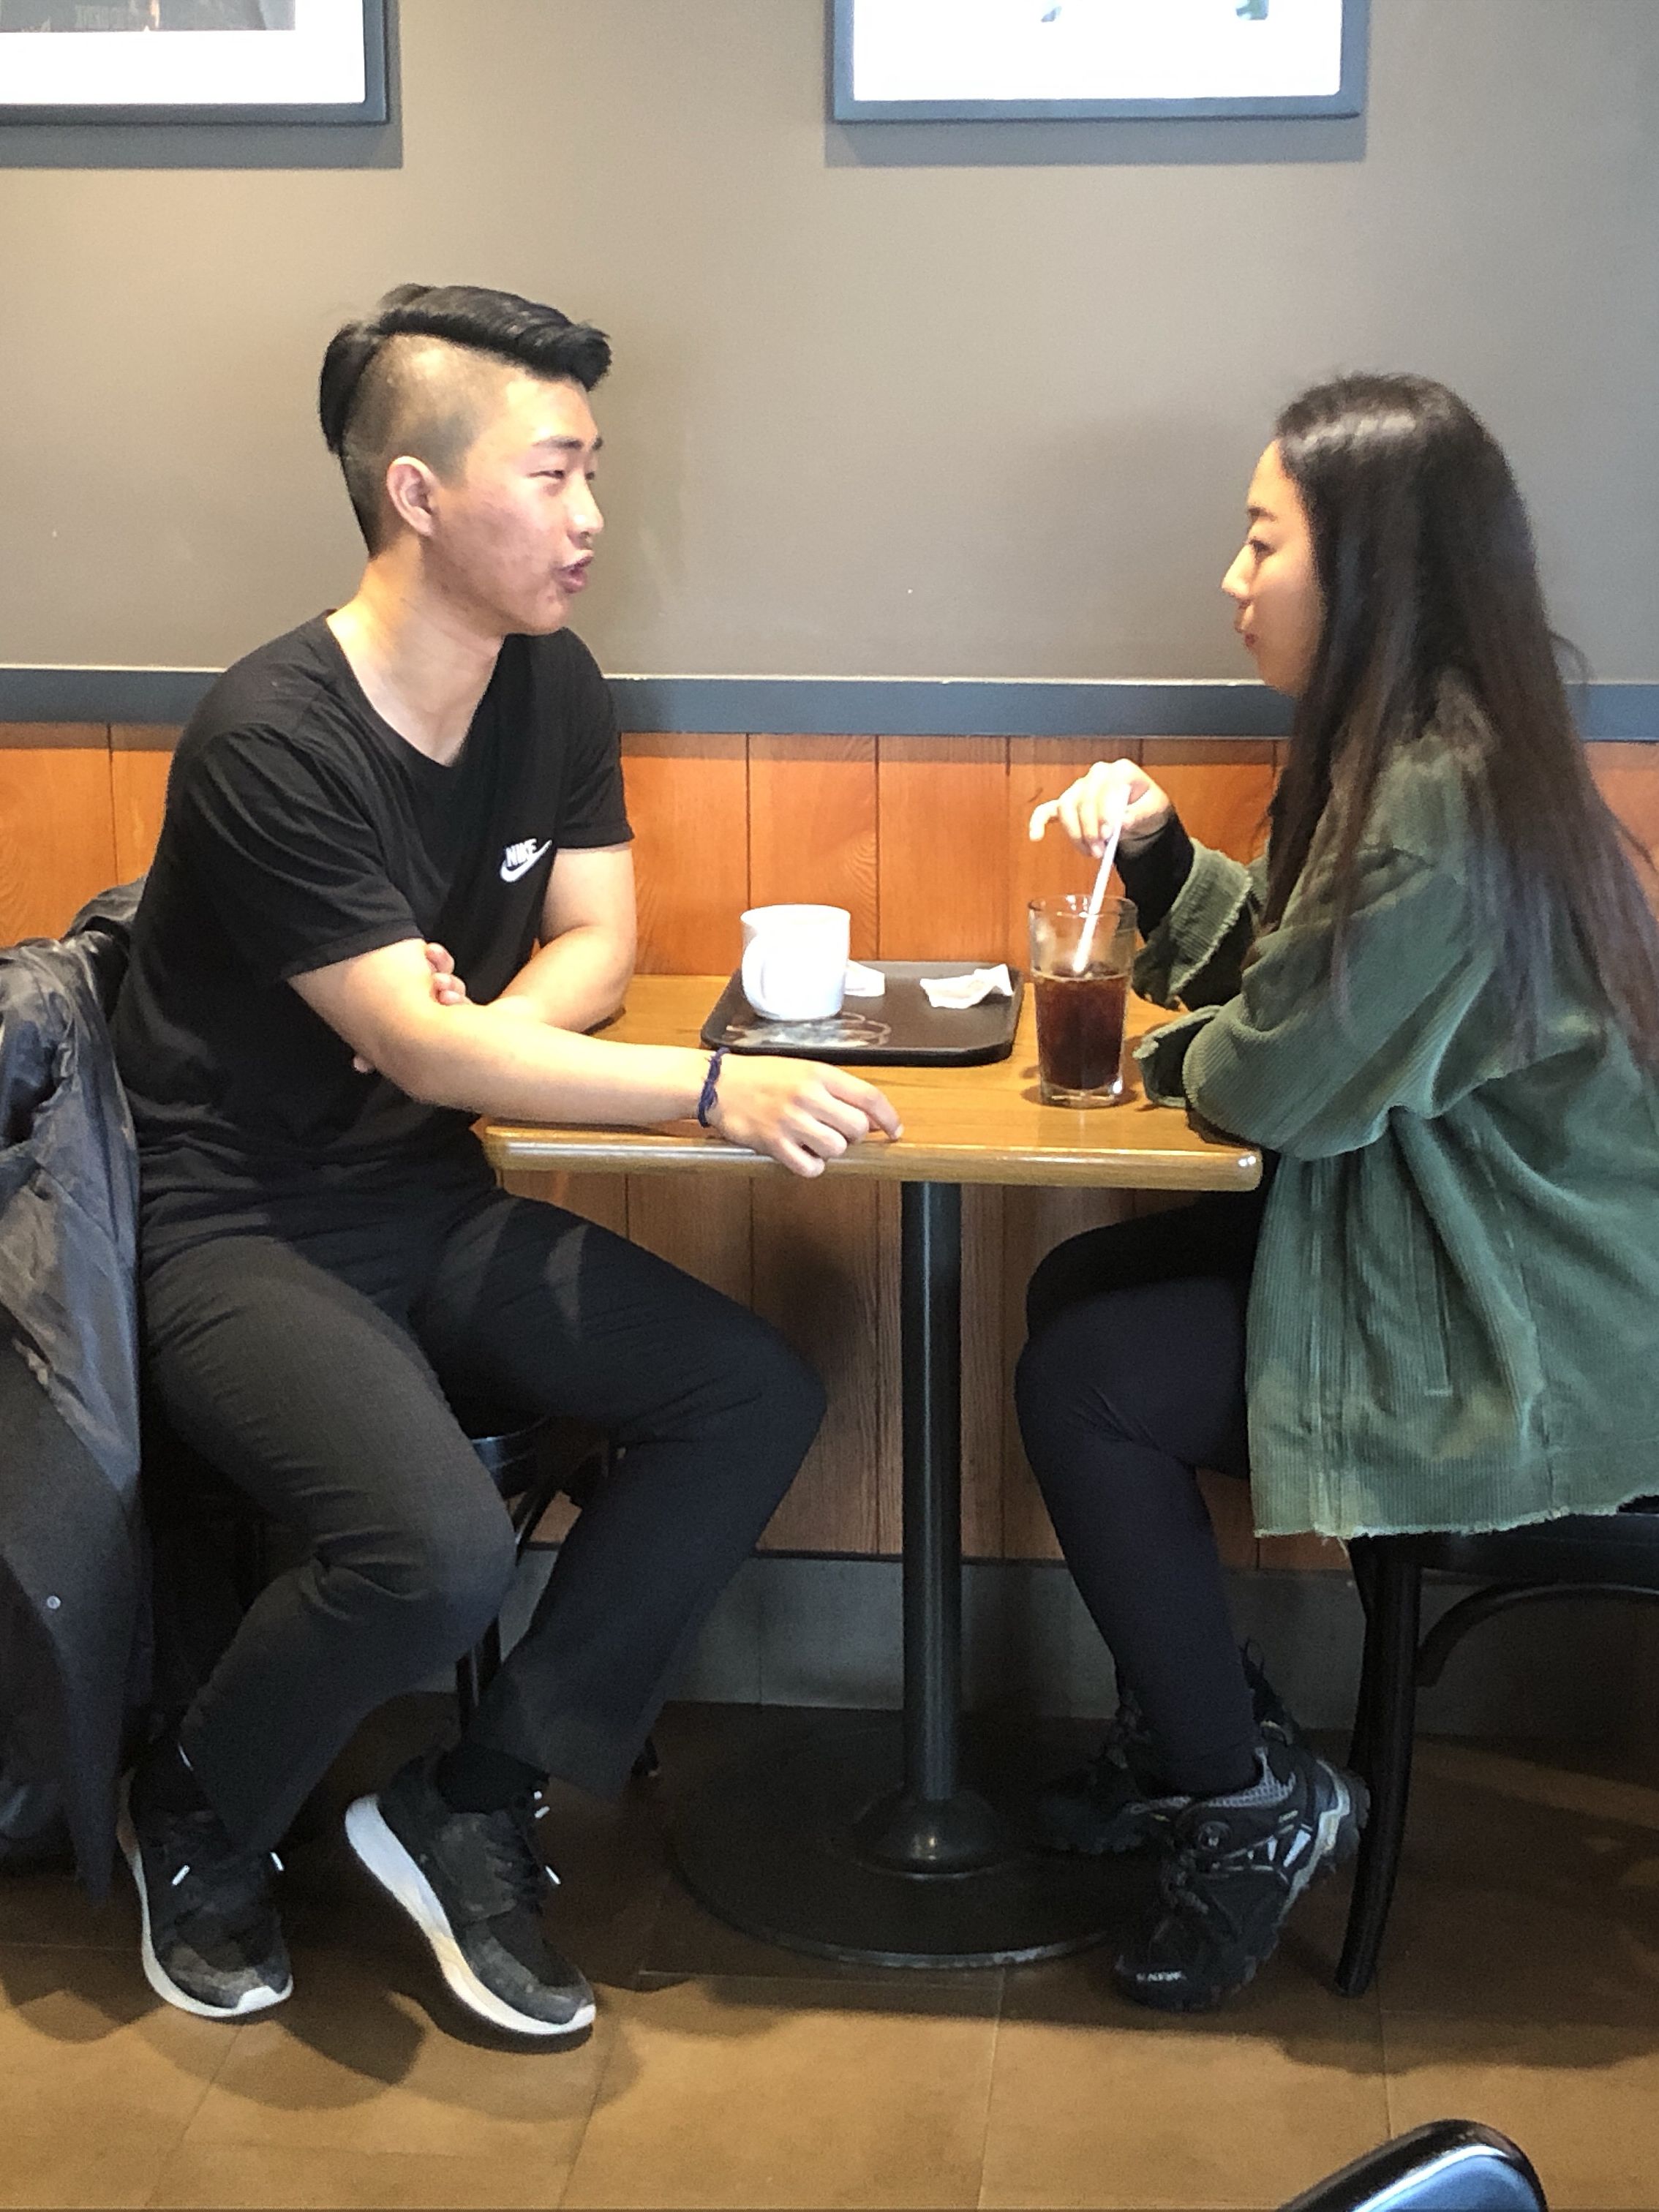 Filipina Teen Student - Why young South Koreans aren't interested in dating | CNN